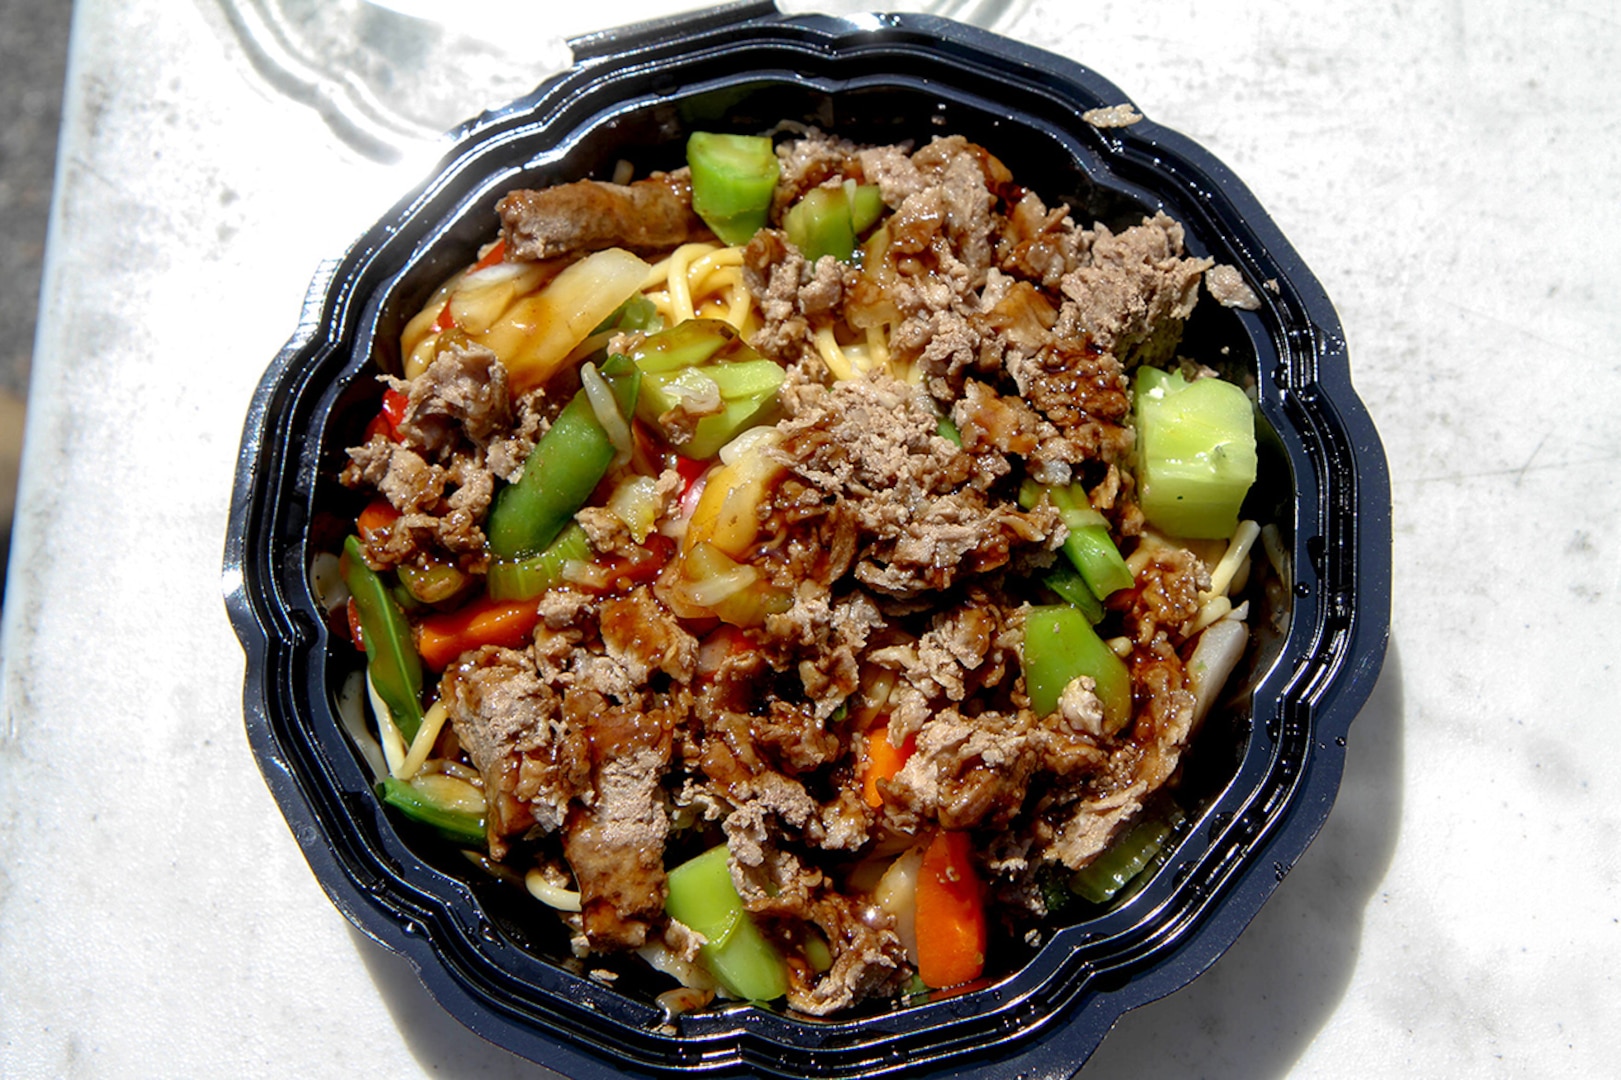 This Asian-style meal is one of the dishes available from the Outpost food truck on Fort Stewart, Georgia. Other options include a bacon burger, wrap, sub or a hearty scratch salad with your choice of meat.